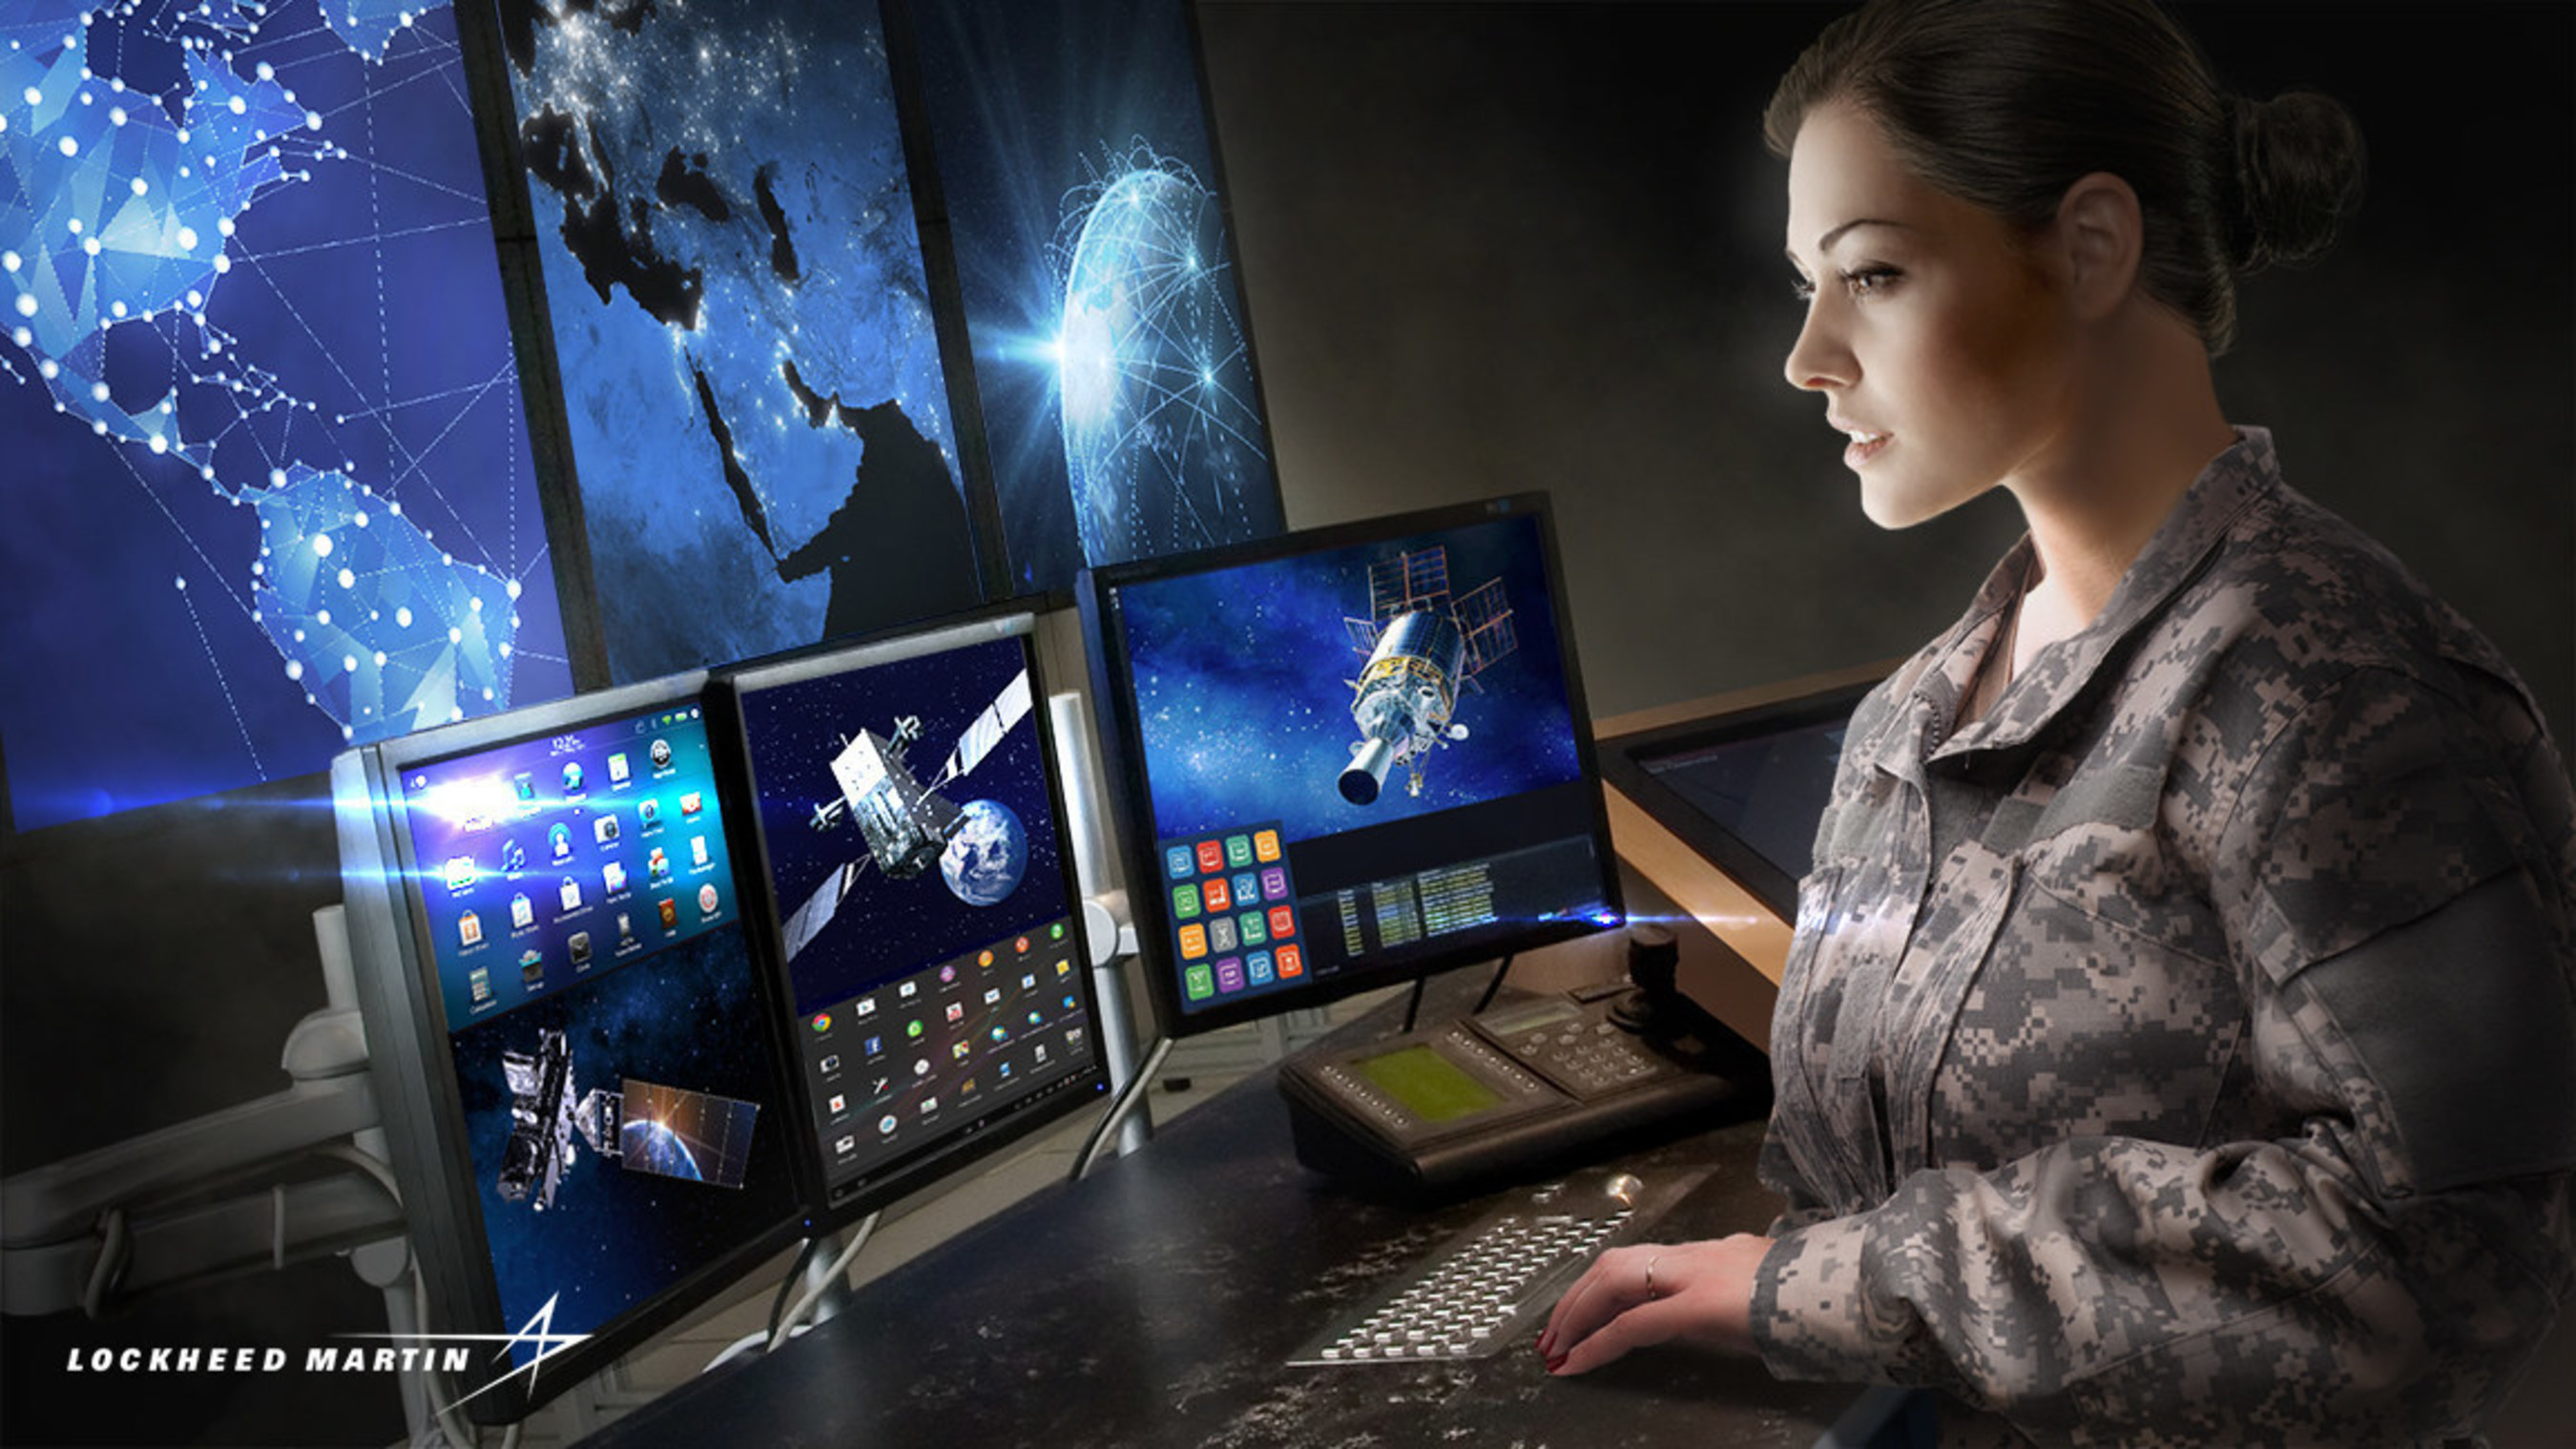 Lockheed Martin ground station app technology couples commercial products, flexible software and open standards to provide customers solutions that are affordable, modular and extensible.